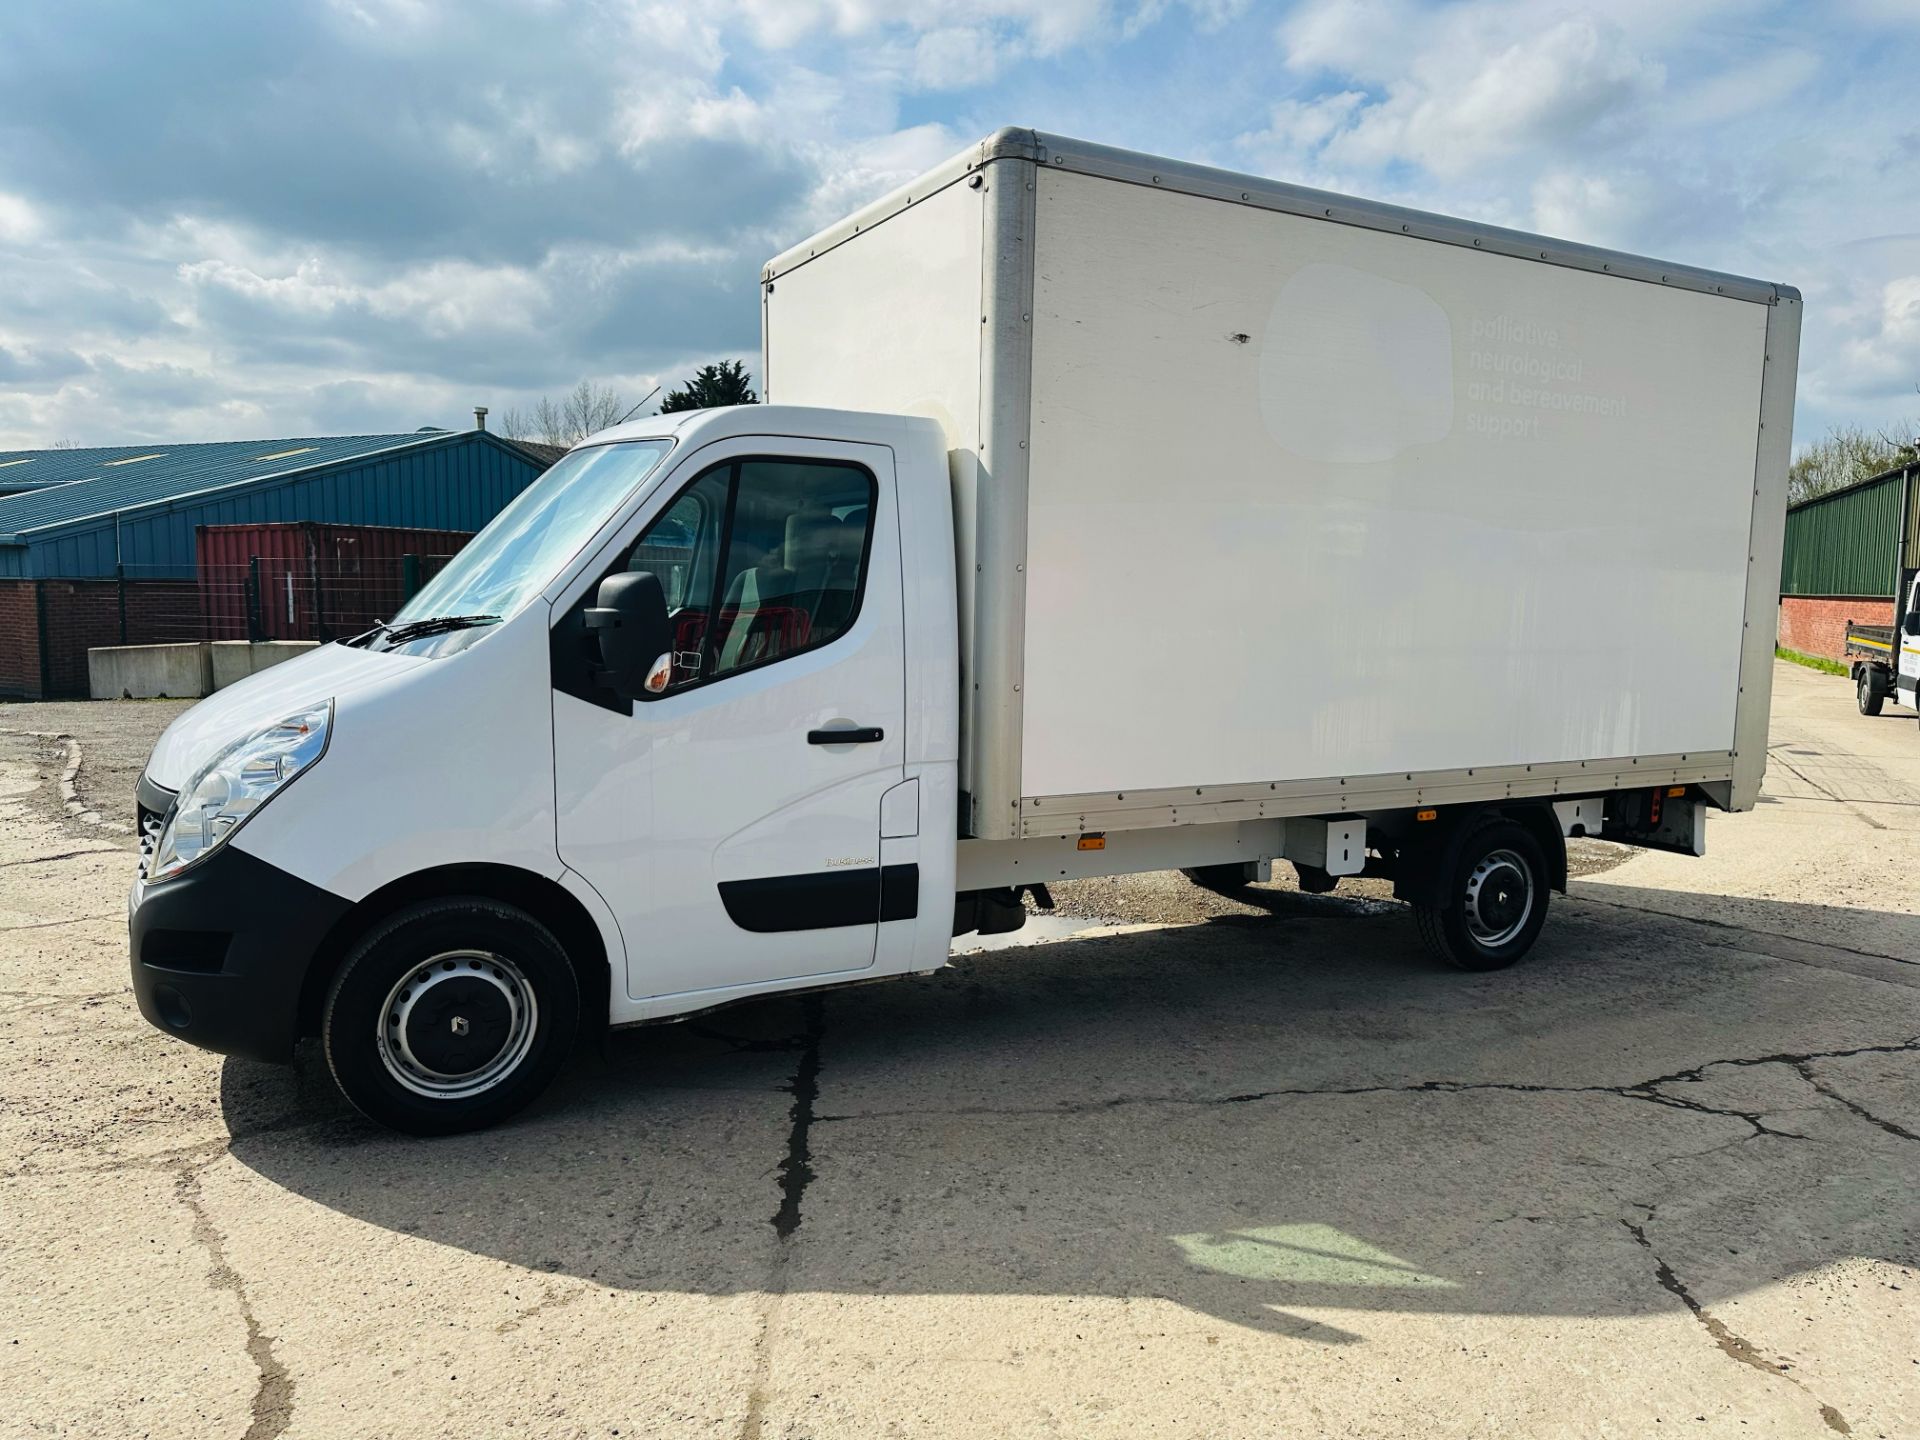 Renault Master 2.3 DCI 130 Business Edition Lwb (Luton / Box Van) - 2019 Model - Euro 6 - Tail Lift - Image 5 of 27